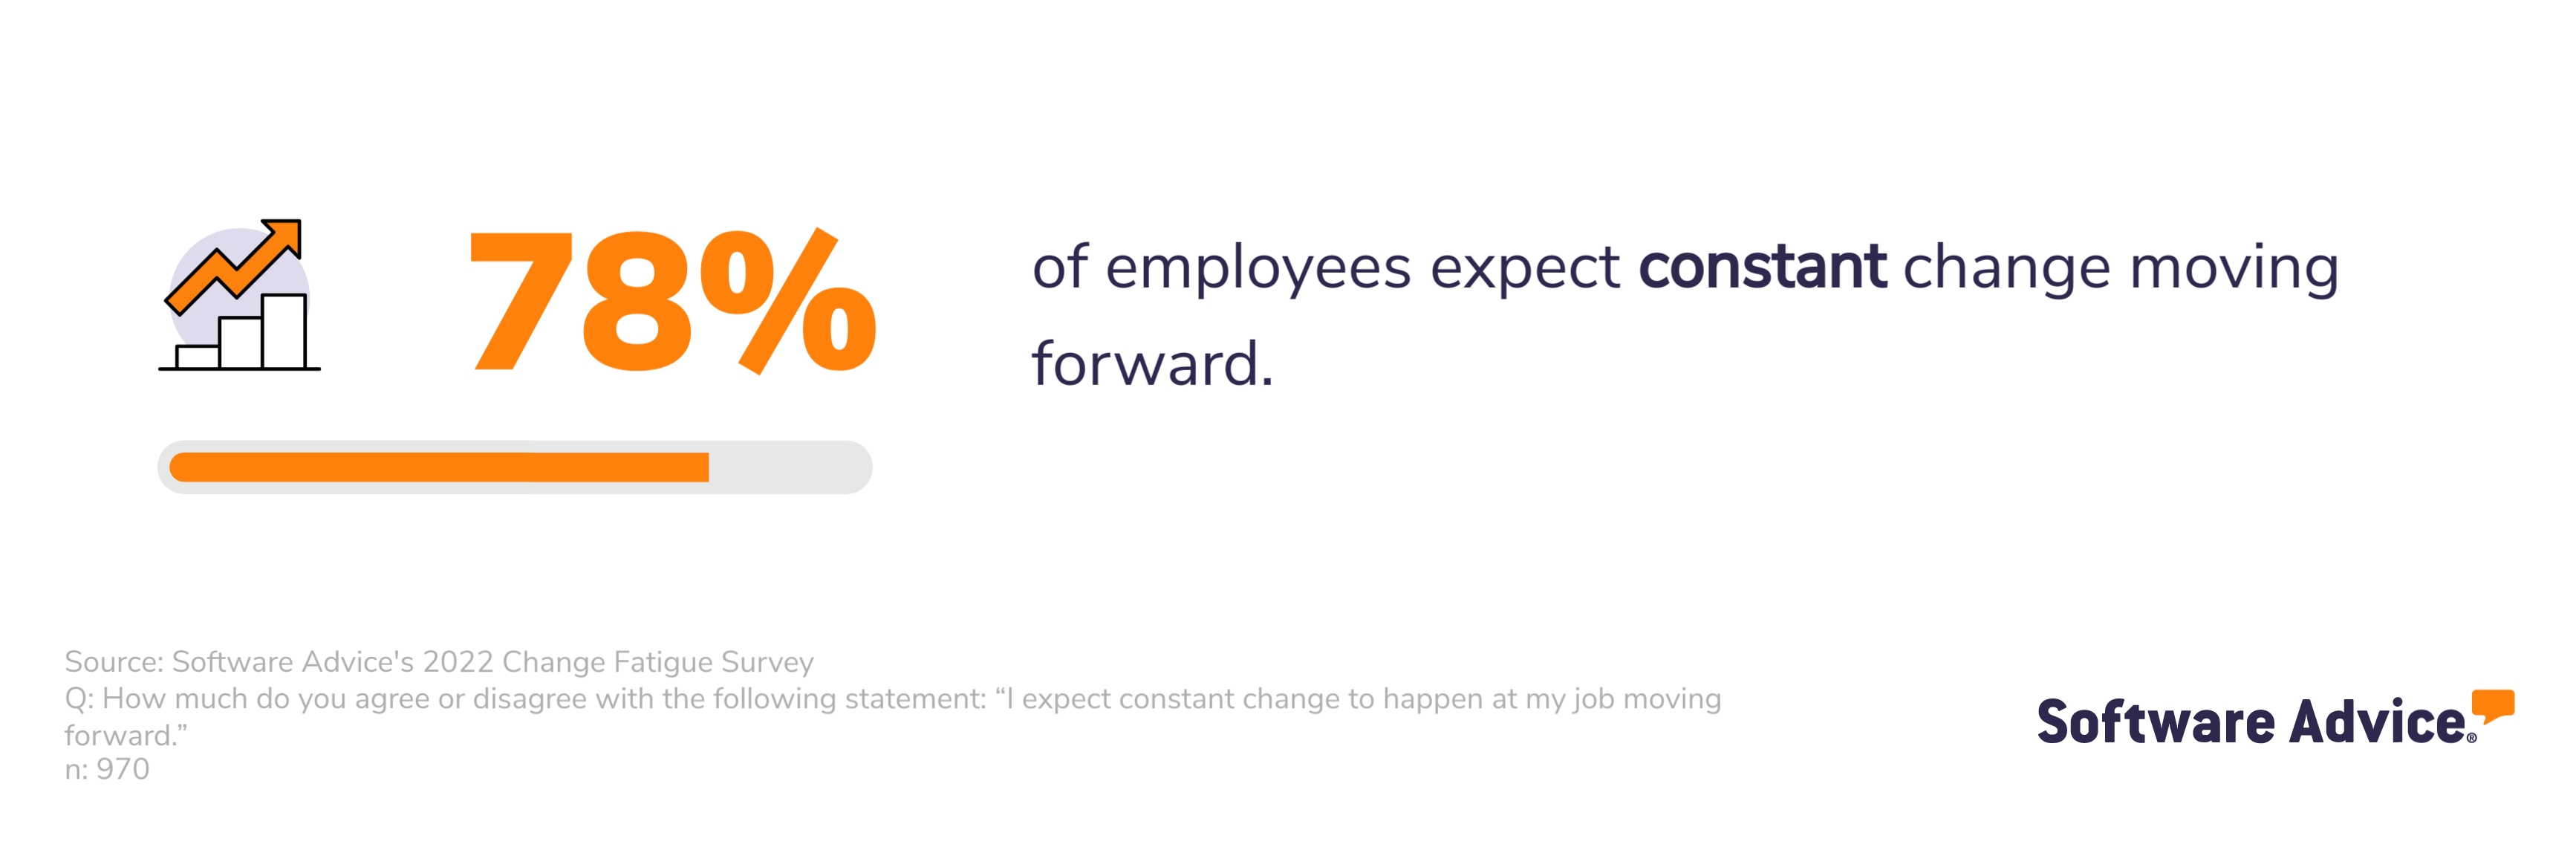 78% of employees expect constant change to happen at their job moving forward. 